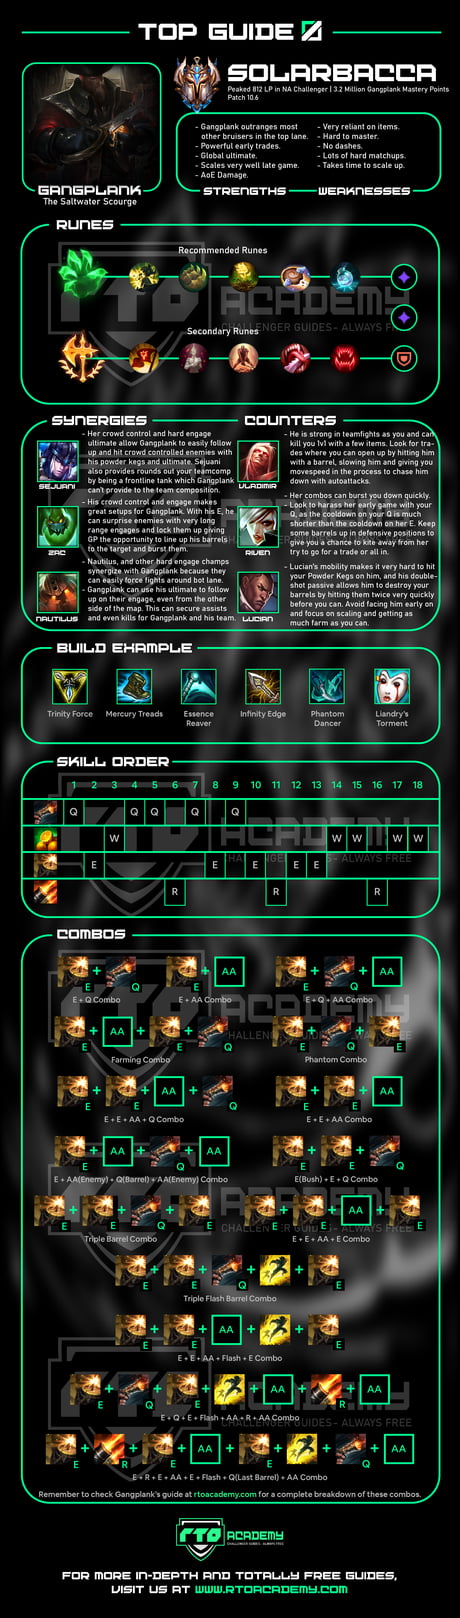 We put together a Gangplank overview infographic that the best builds, runes, strengths, weaknesses,